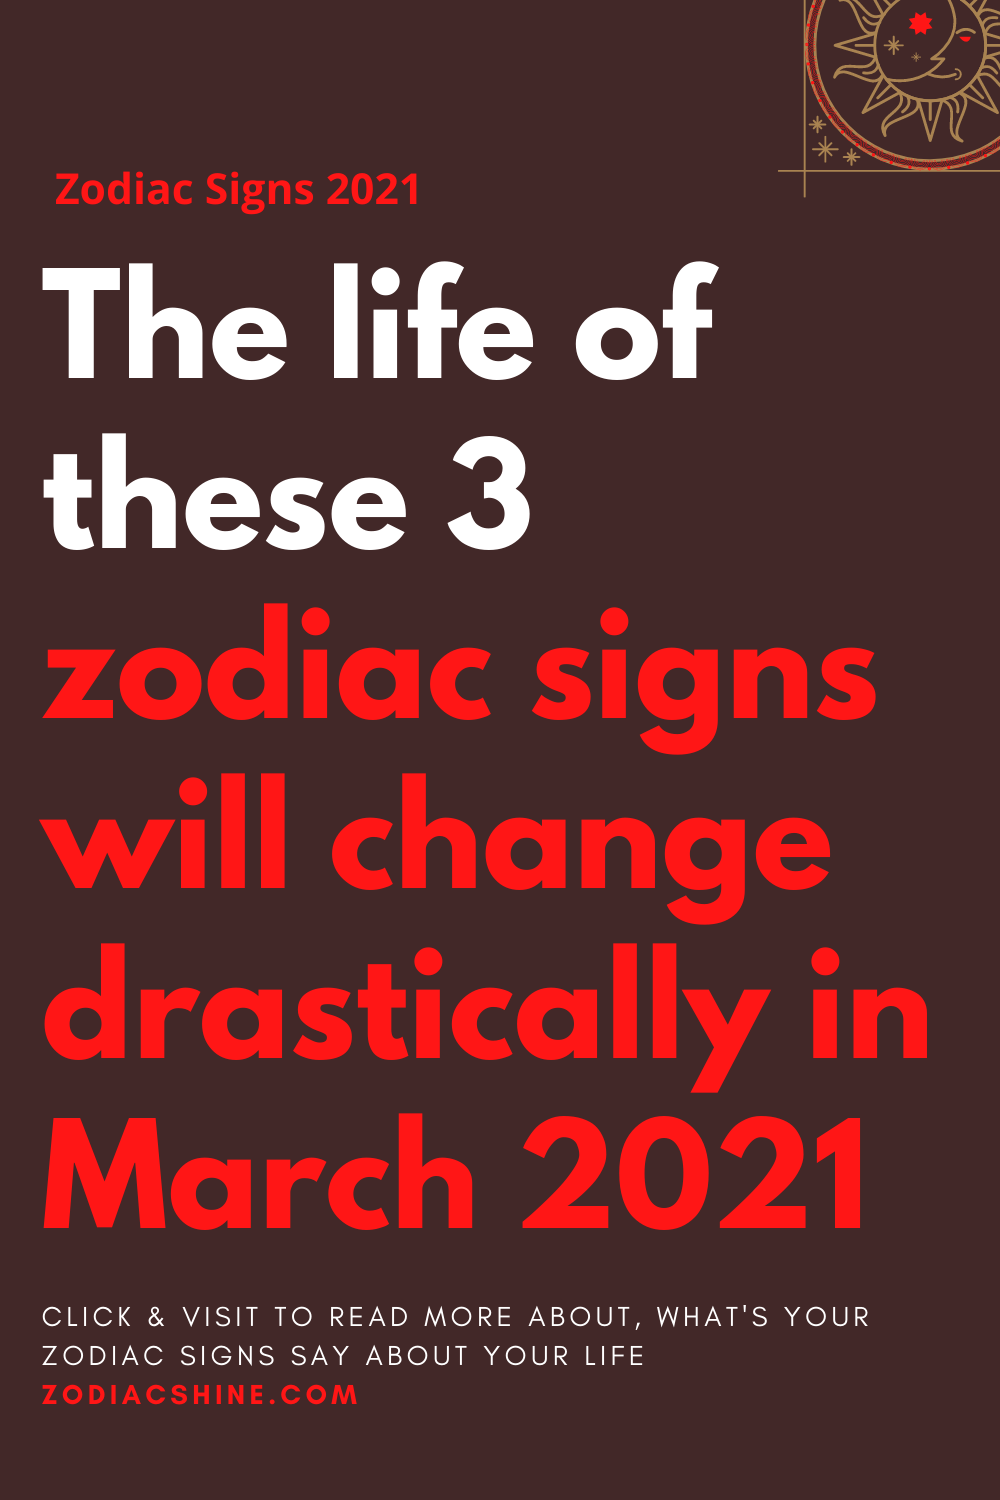 The life of these 3 zodiac signs will change drastically in March 2021